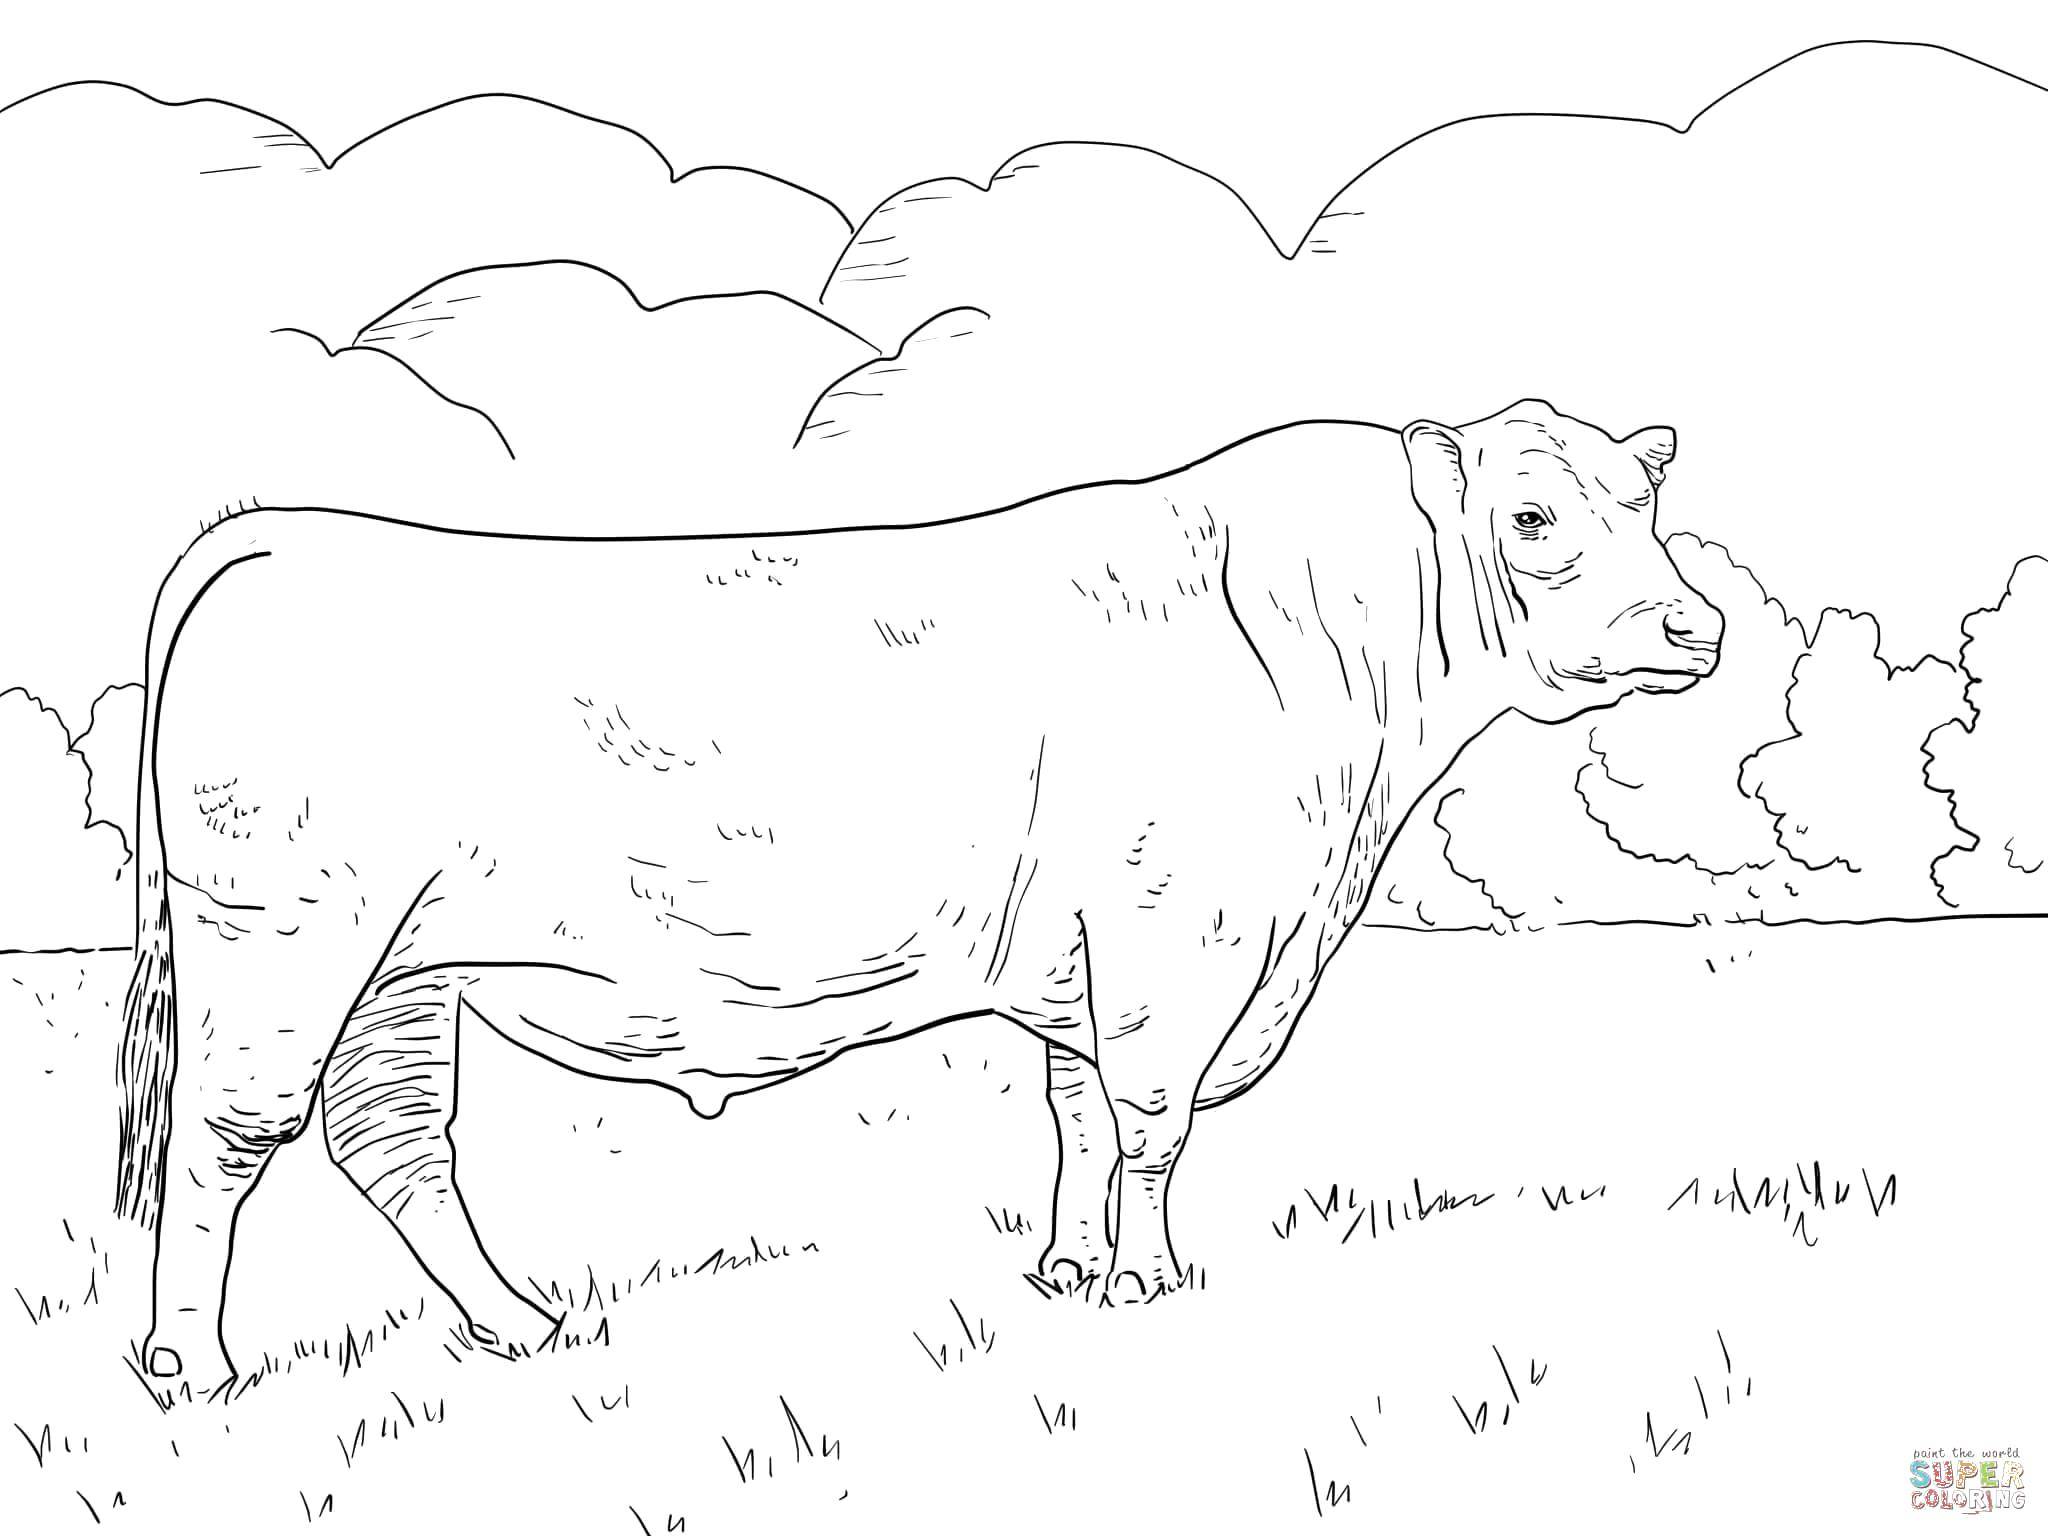 Coloring Cow. Category Animals. Tags:  Animals, cow.